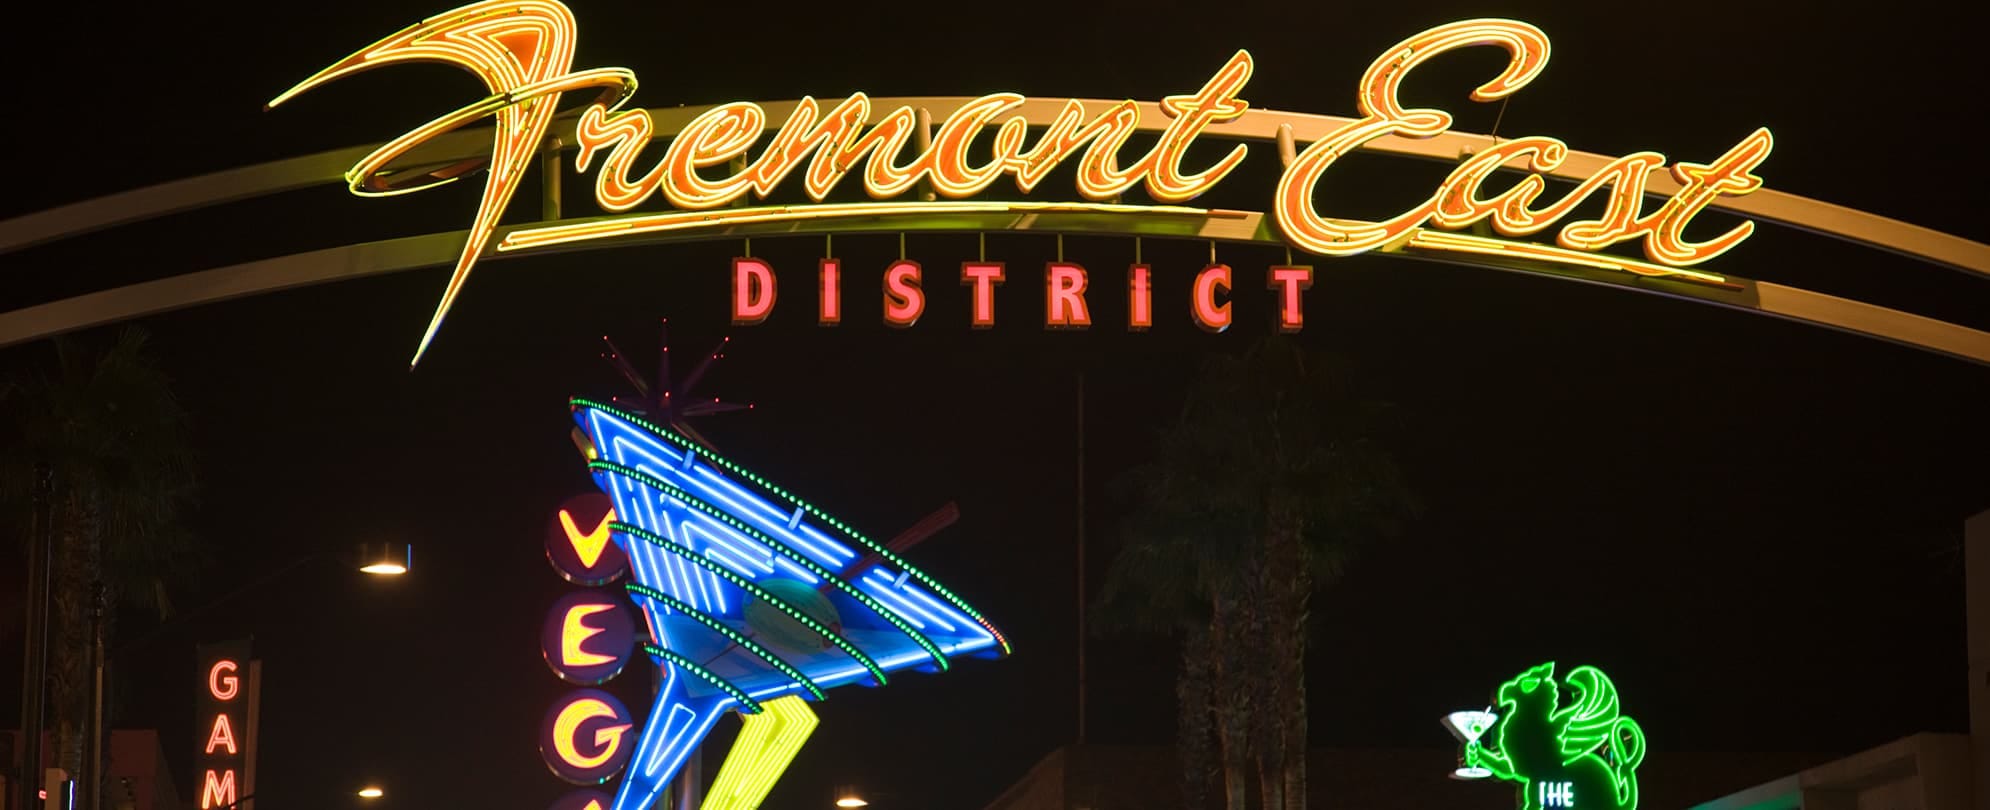 A lit up sign that reads "Fremont East District," in Las Vegas, Nevada.